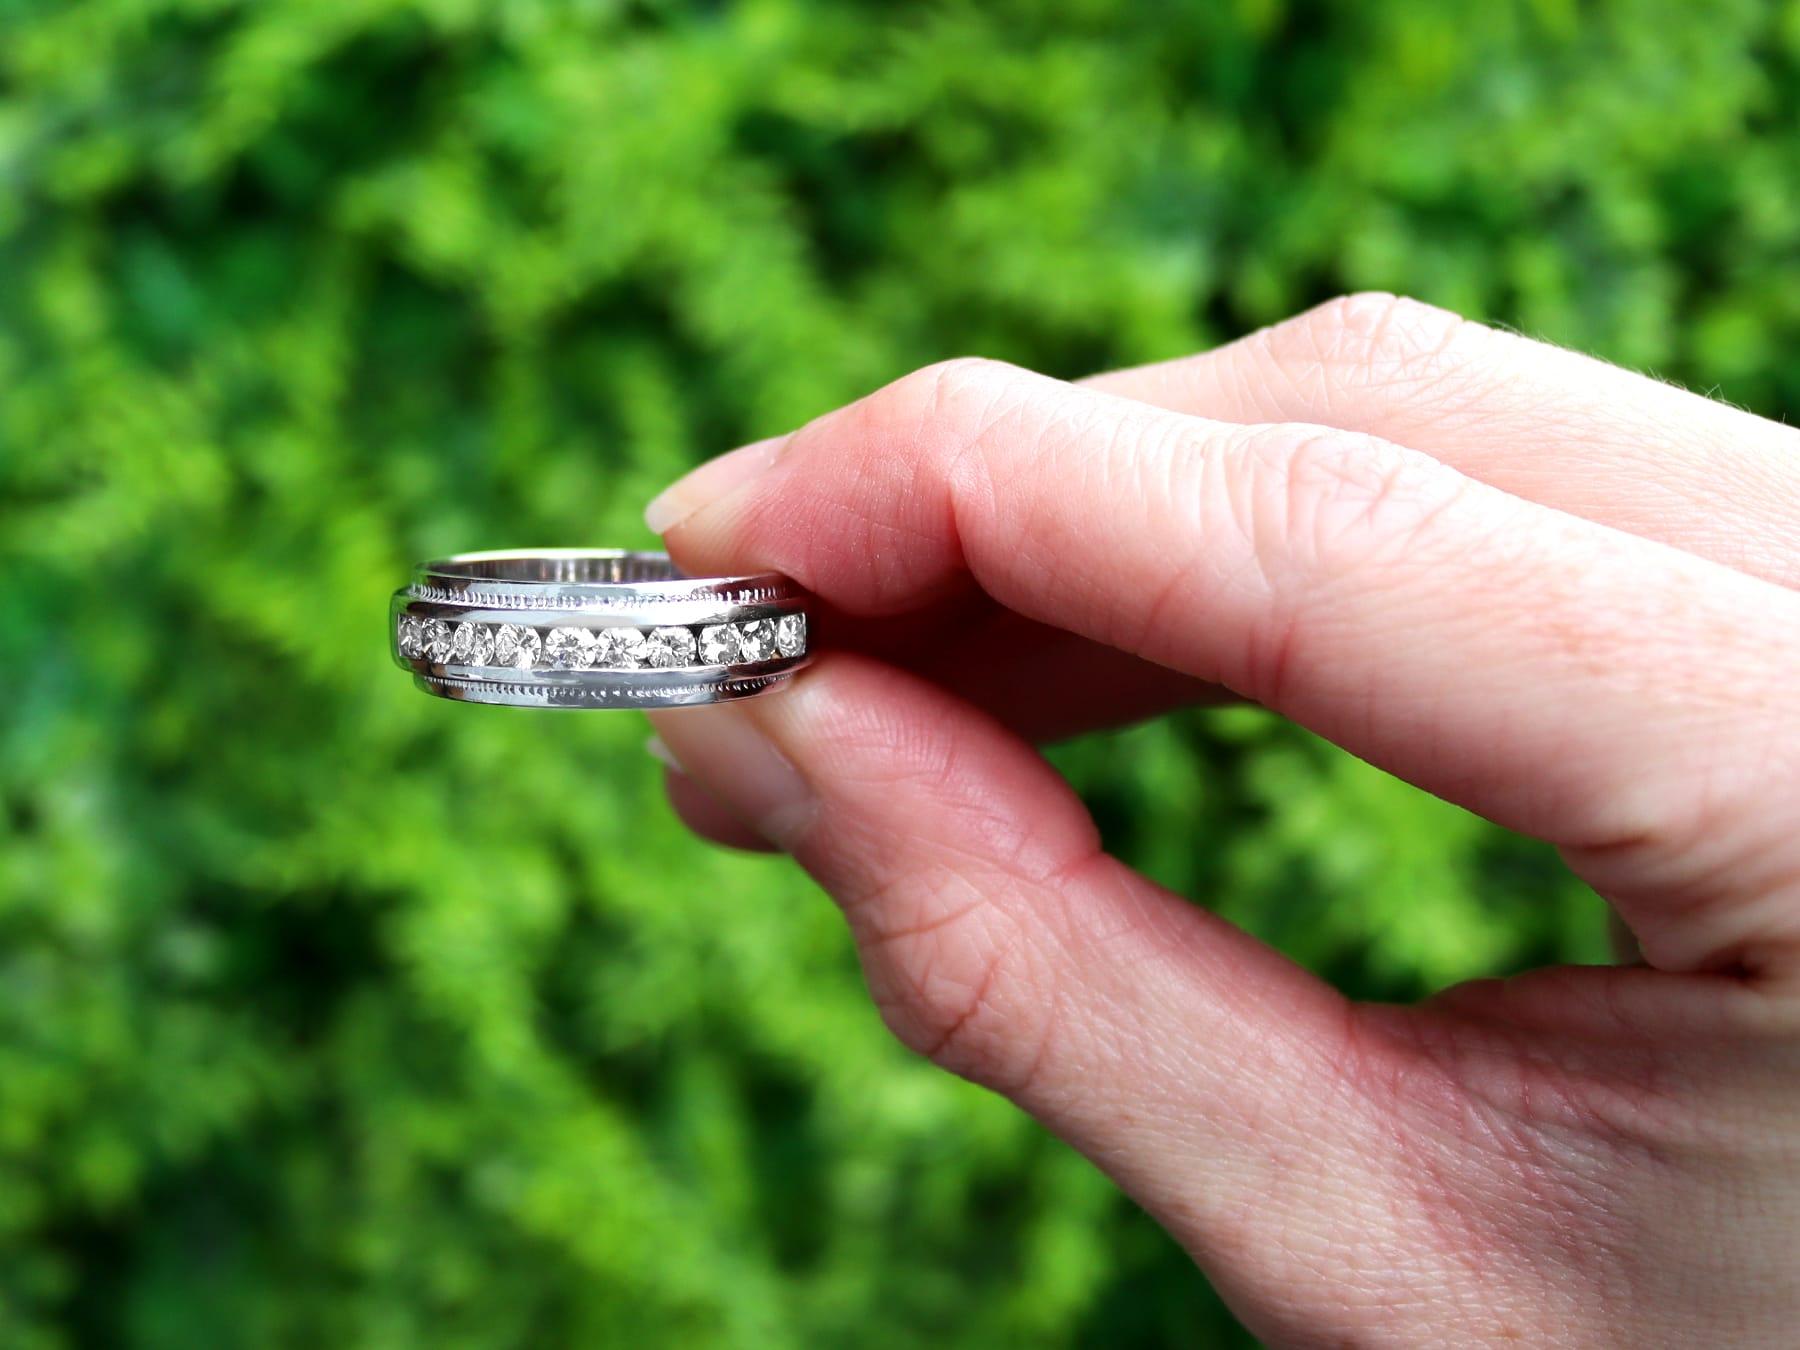 A fine and impressive 1.10 carat diamond, 14 karat white gold half eternity ring; part of our vintage diamond jewelry collection.

This fine vintage half eternity diamond ring has been crafted in 14k white gold.

The anterior surface of the ring is